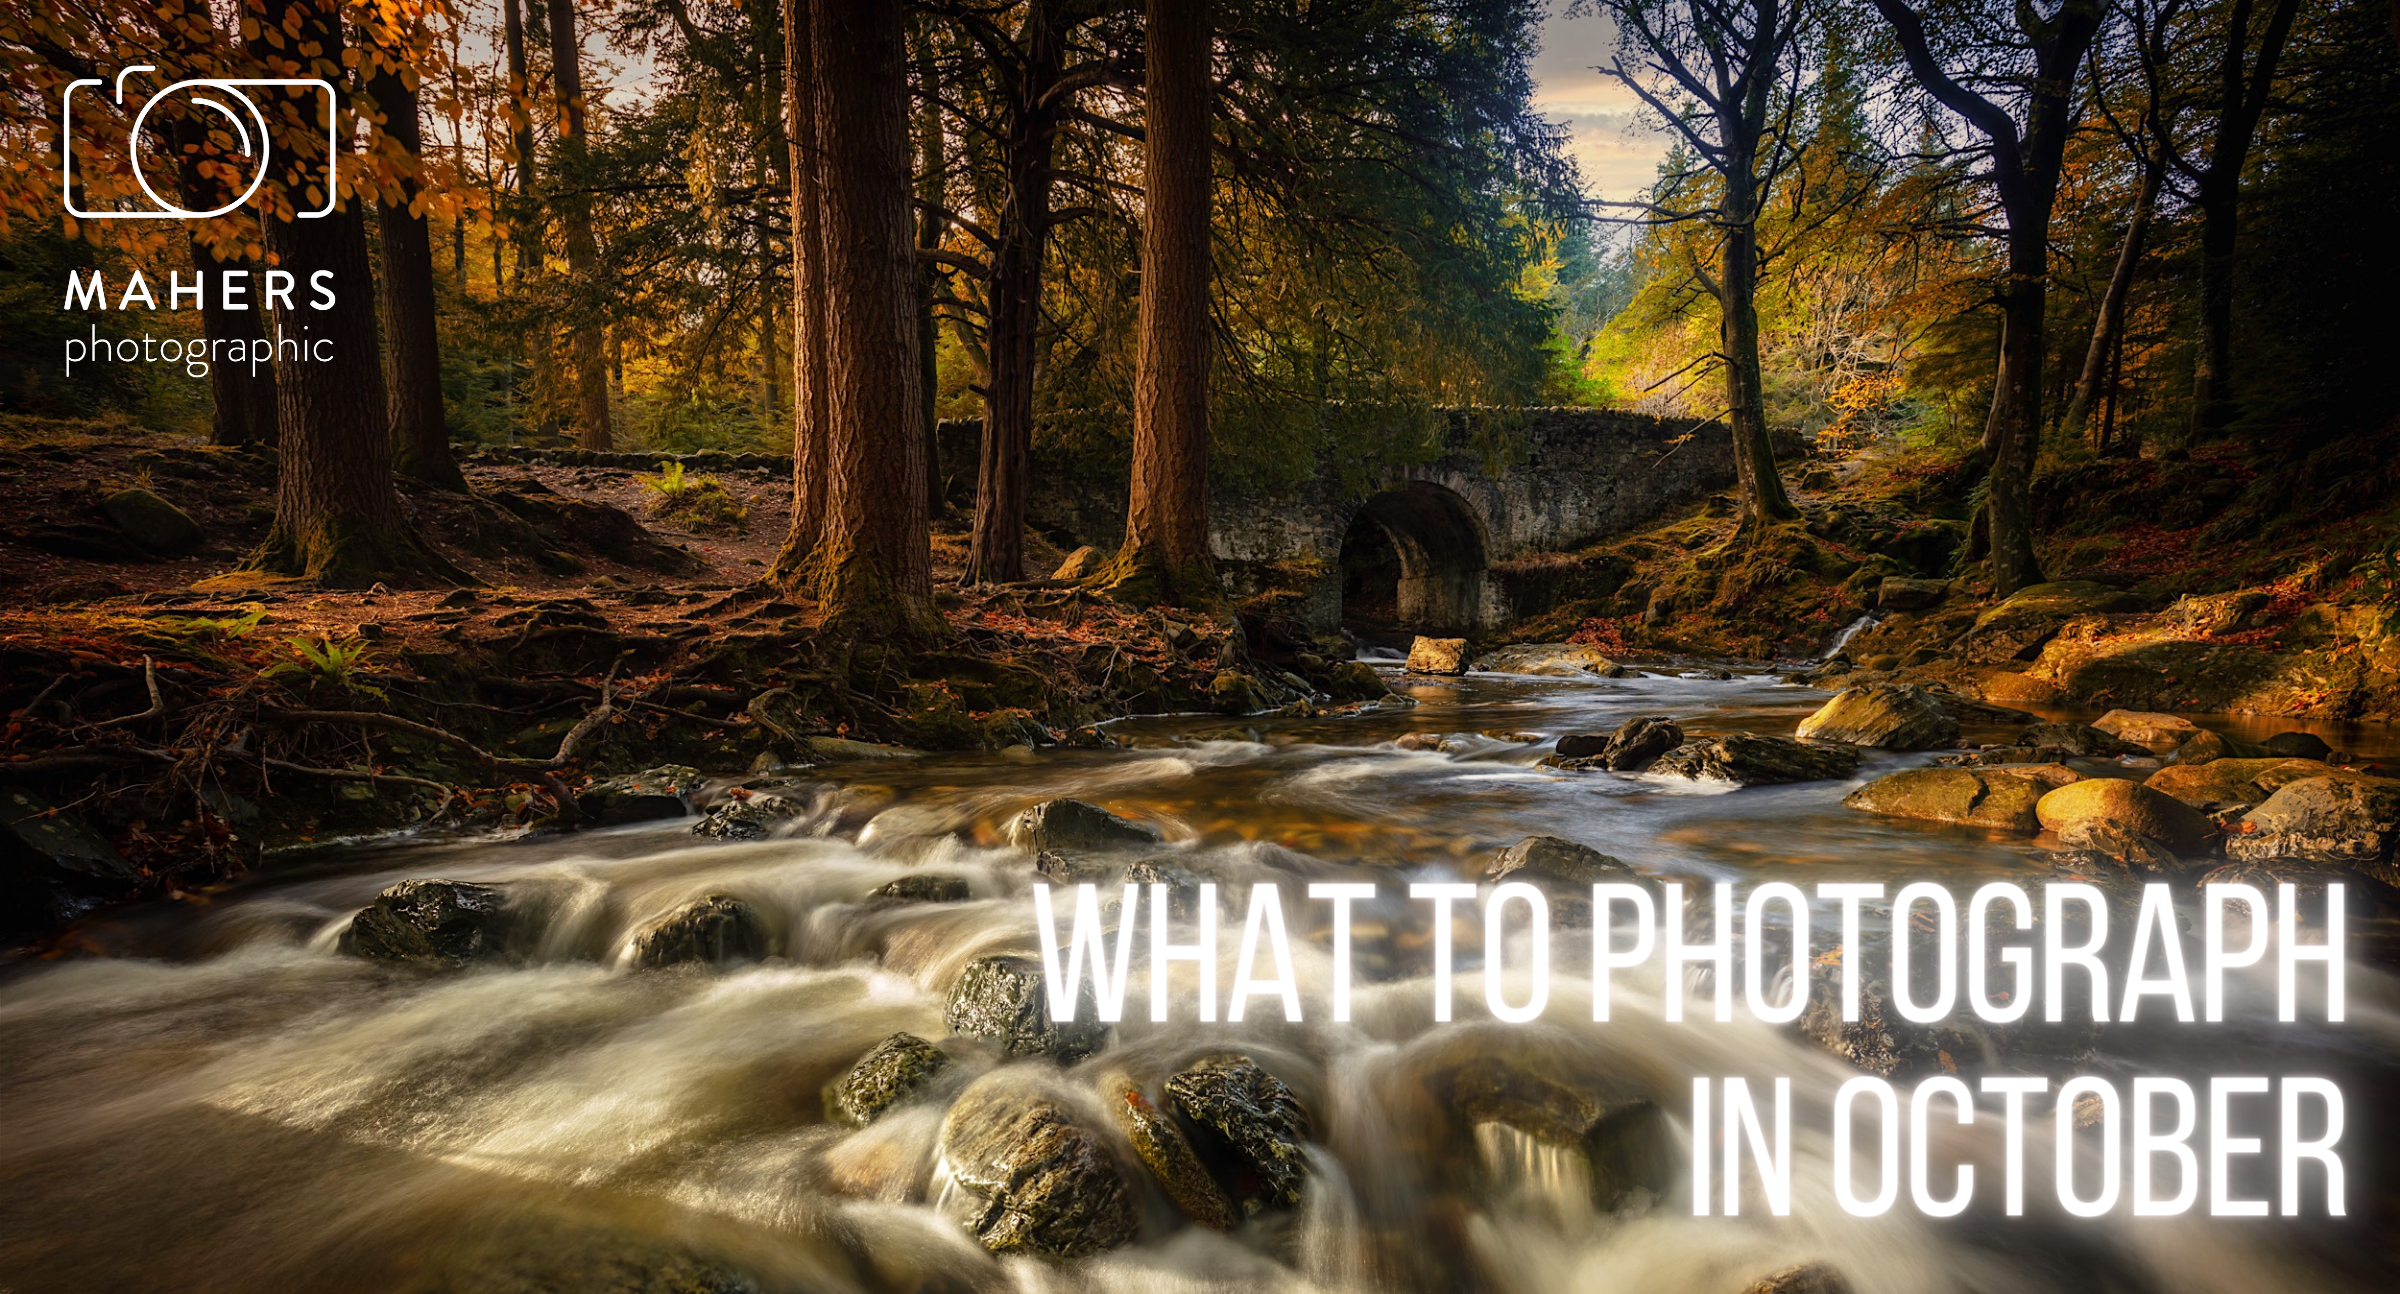 What to photograph in October?